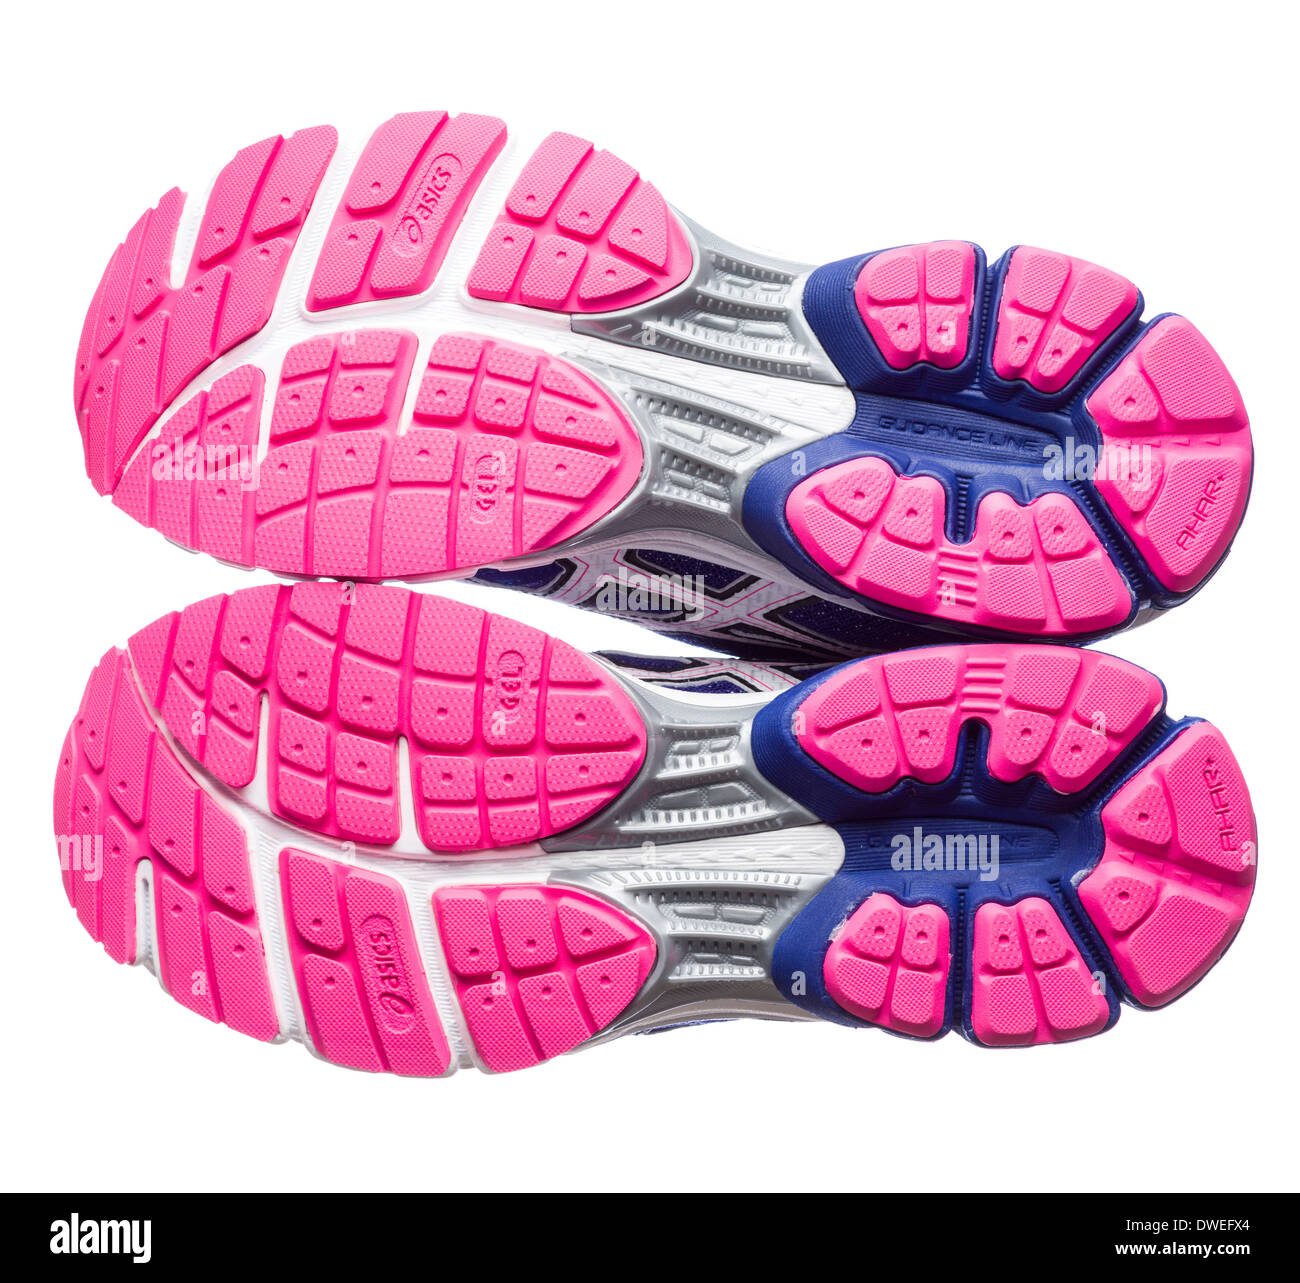 Blue and pink Asics Gel Pulse 5 running shoes Stock Photo - Alamy